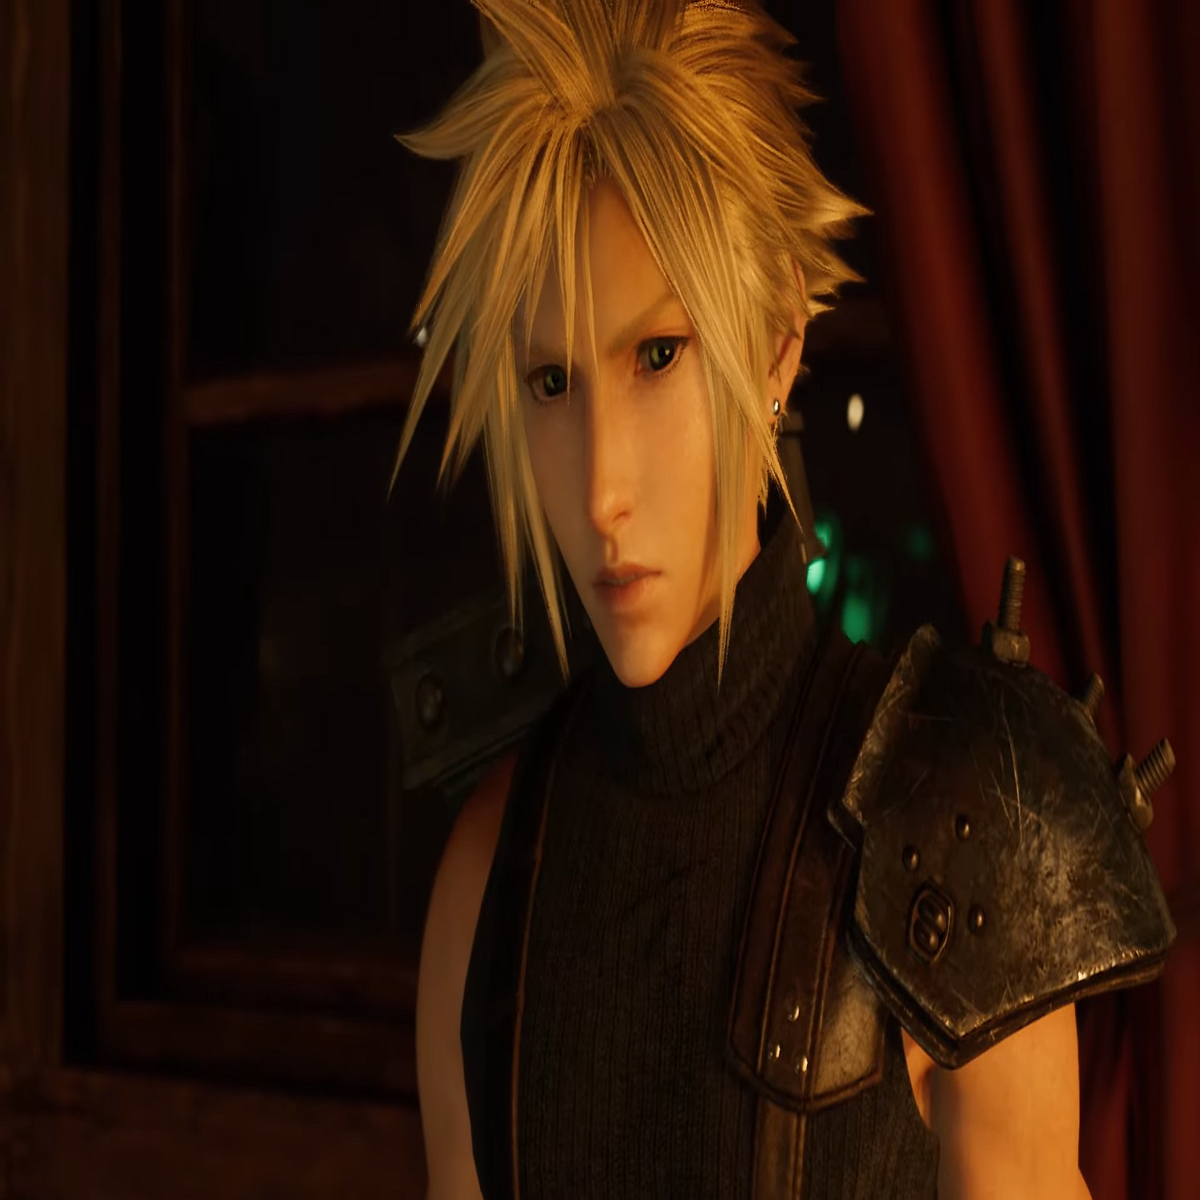 Final Fantasy 7 Rebirth's leads discuss following up on Remake